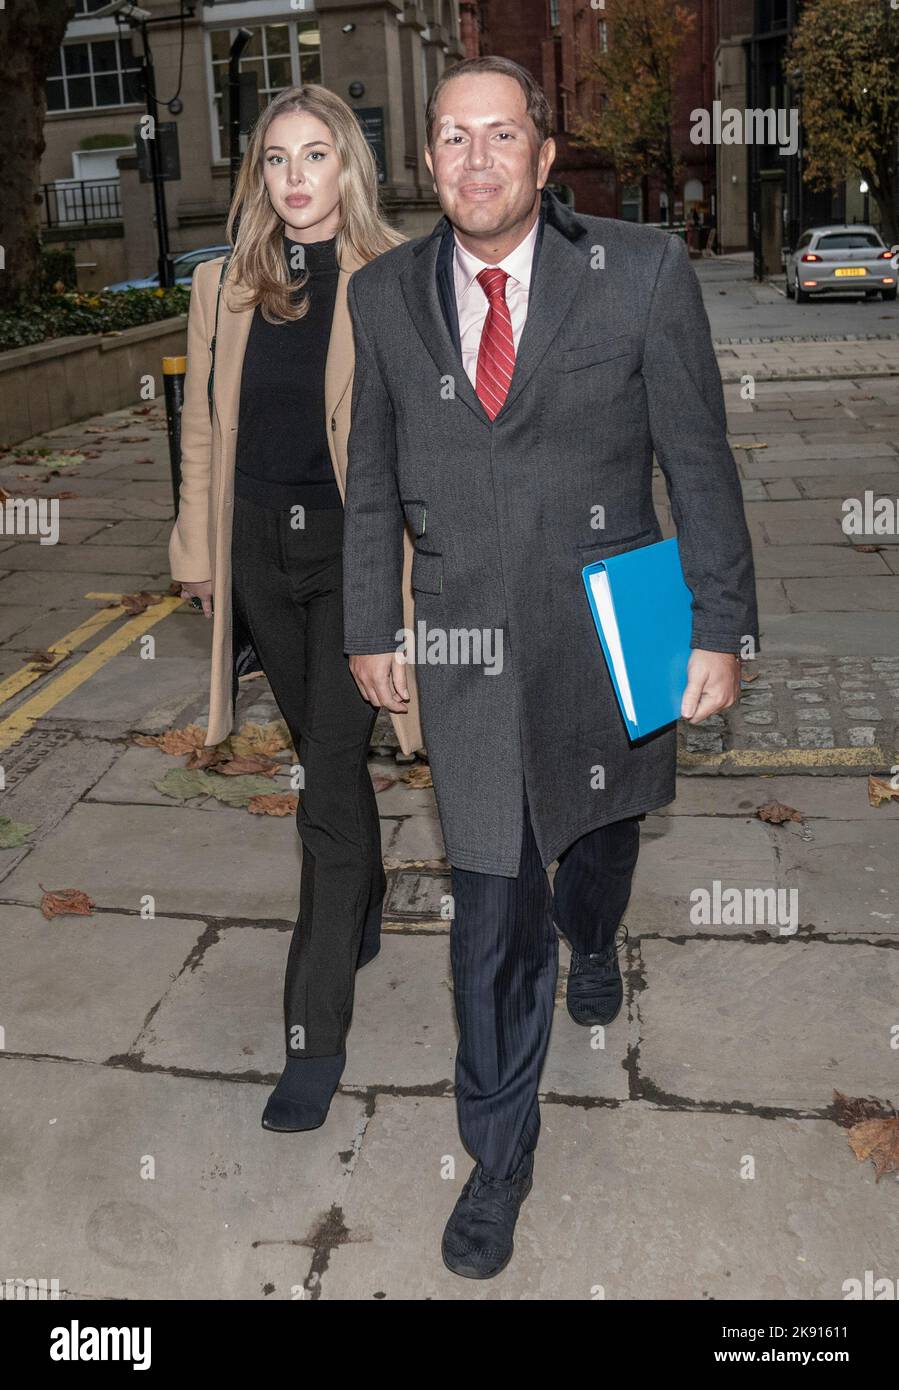 James Stunt, ex-husband of Formula One heiress Petra Ecclestone, leaves Cloth Hall Court in Leeds with Helena Robinson, where he is trial for money laundering charges with seven other defendants. They all deny the same money laundering charge involved depositing cash in the account of Bradford gold dealer Fowler Oldfield between January 2014 and September 2016. The sum involved is in excess of £250 million. Picture date: Tuesday October 25, 2022. Stock Photo